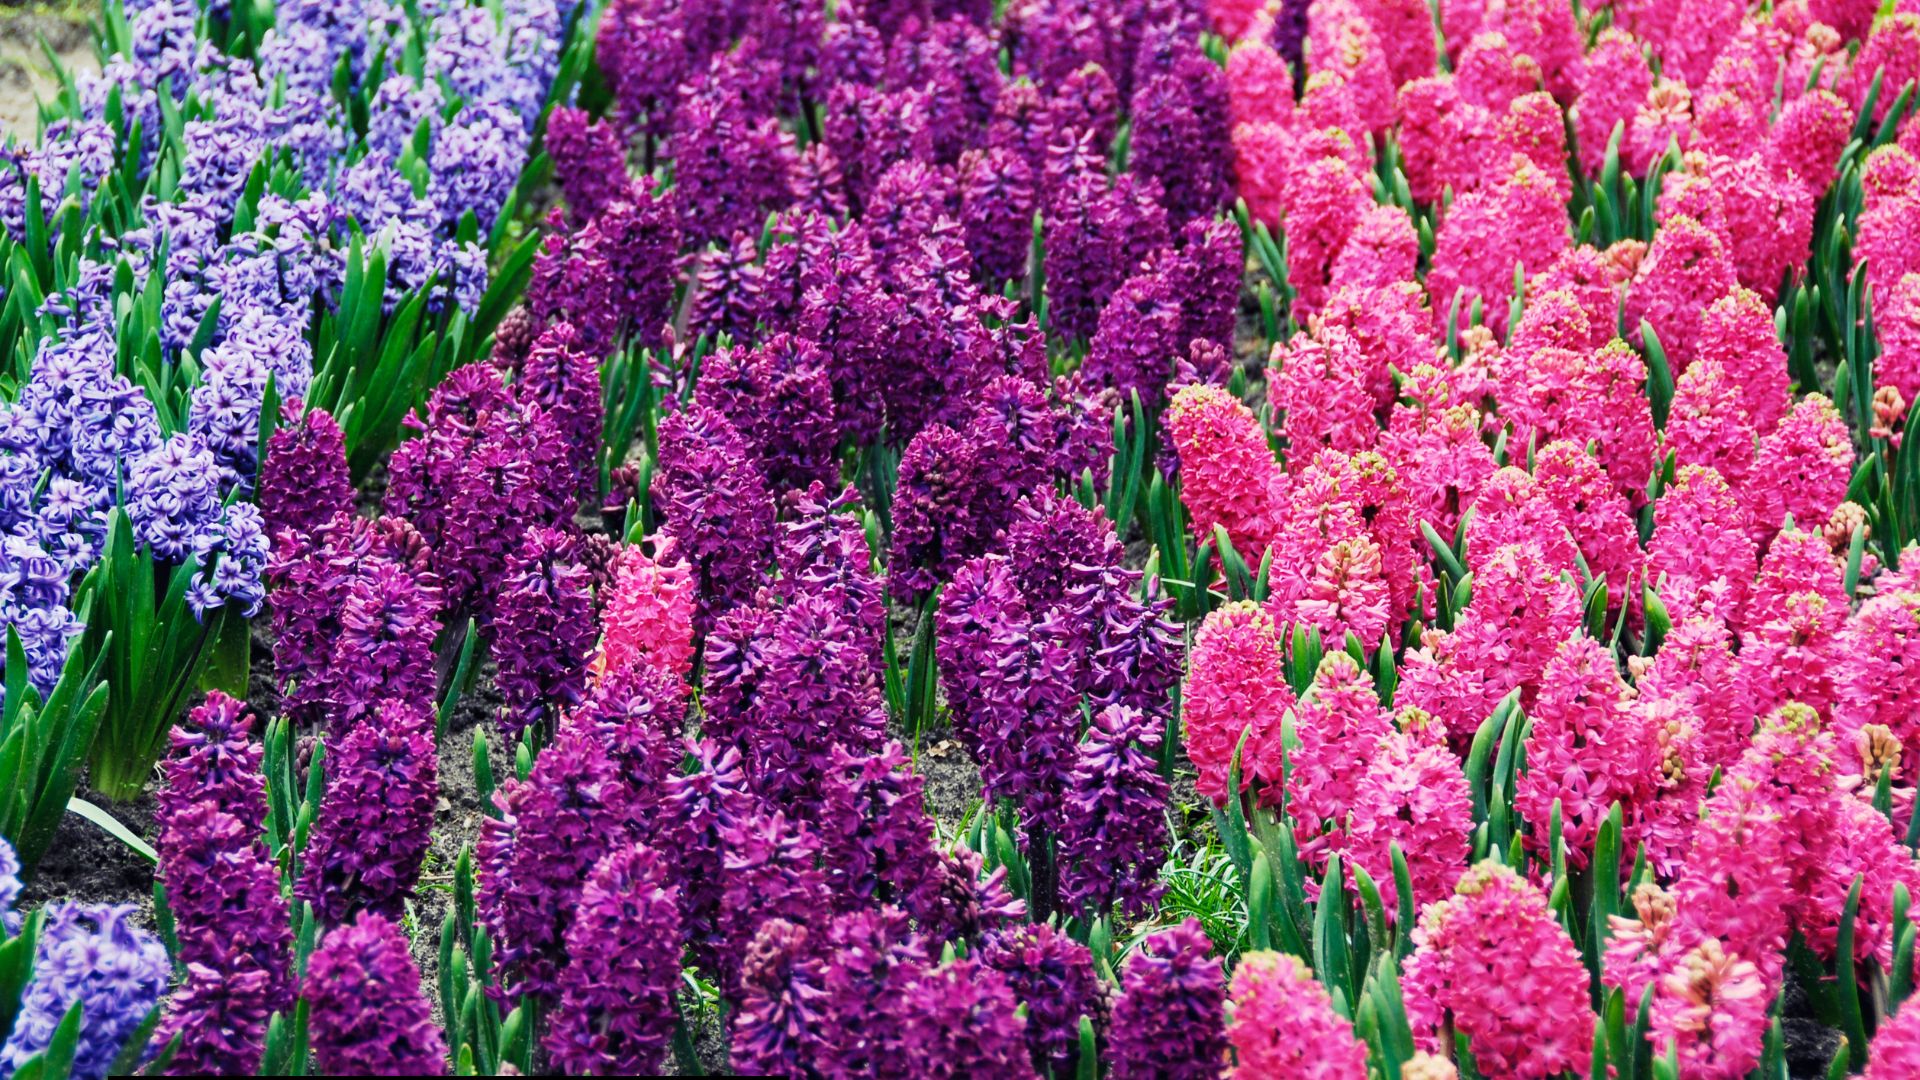 6 Simple Tips To Enhance Your Hyacinth Patch After The Blooms Fade Away